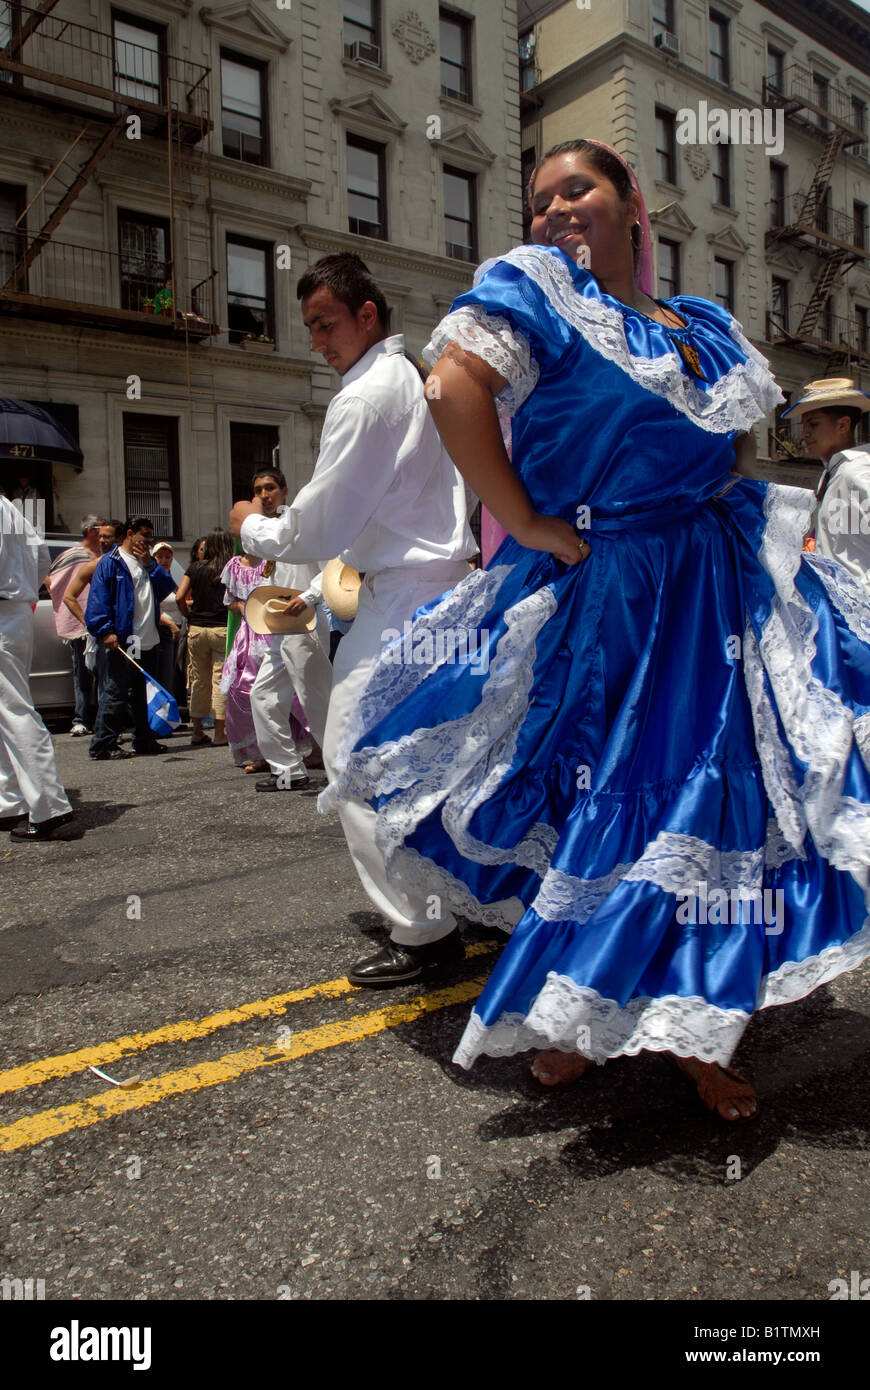 El Salvadorian folk dancers perform in a flower parade on Central Park West in New York NY Stock Photo